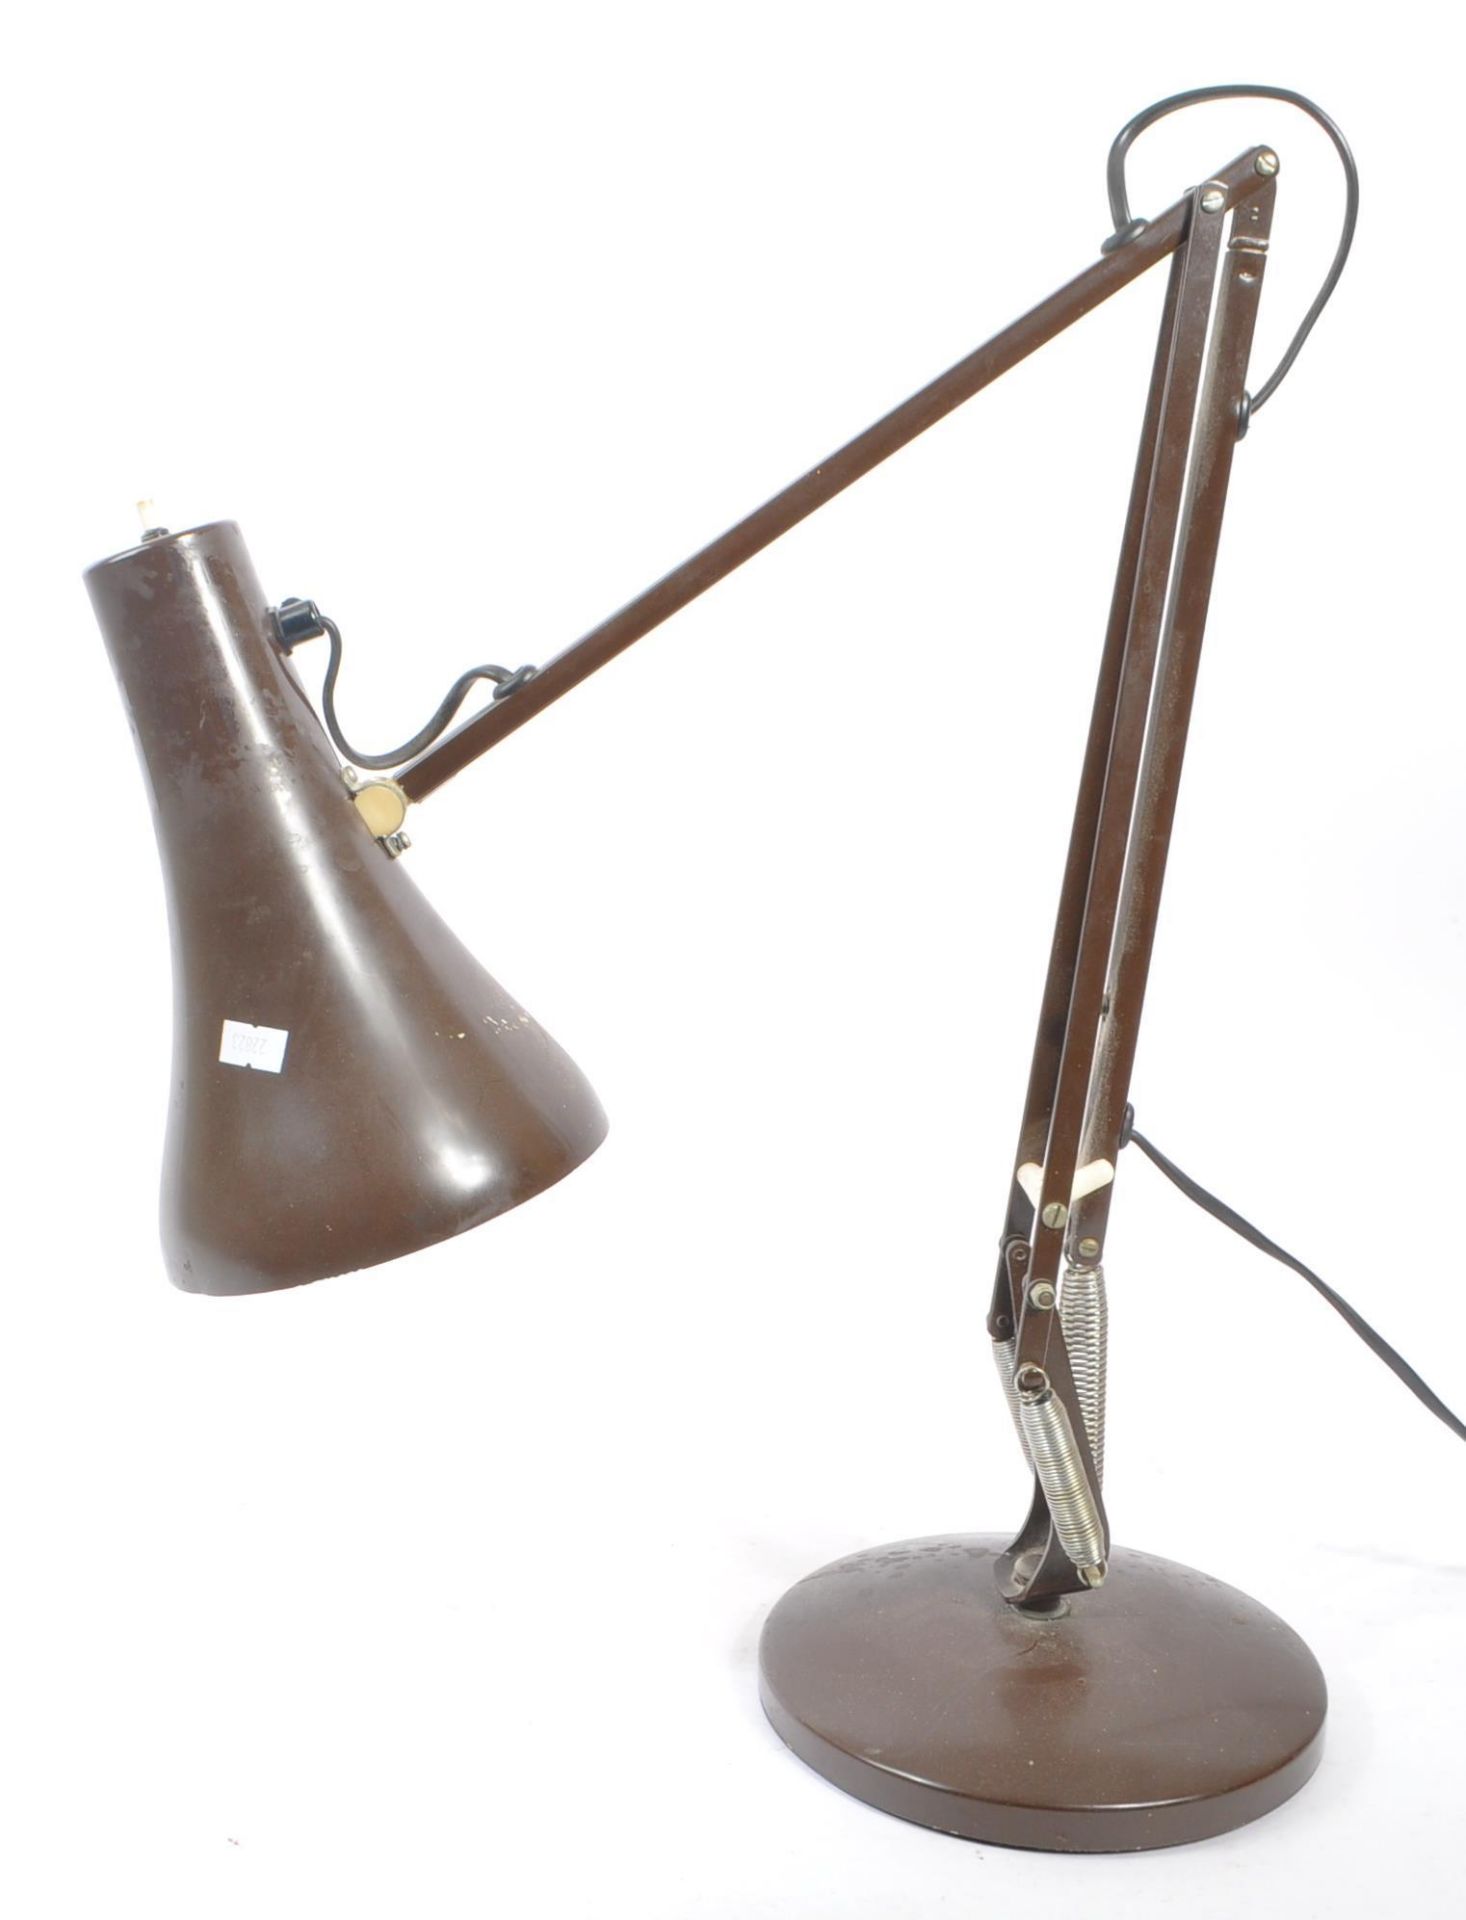 HERBERT TERRY & SONS - MODEL 90 MID CENTURY ANGLEPOISE LAMP - Image 4 of 6